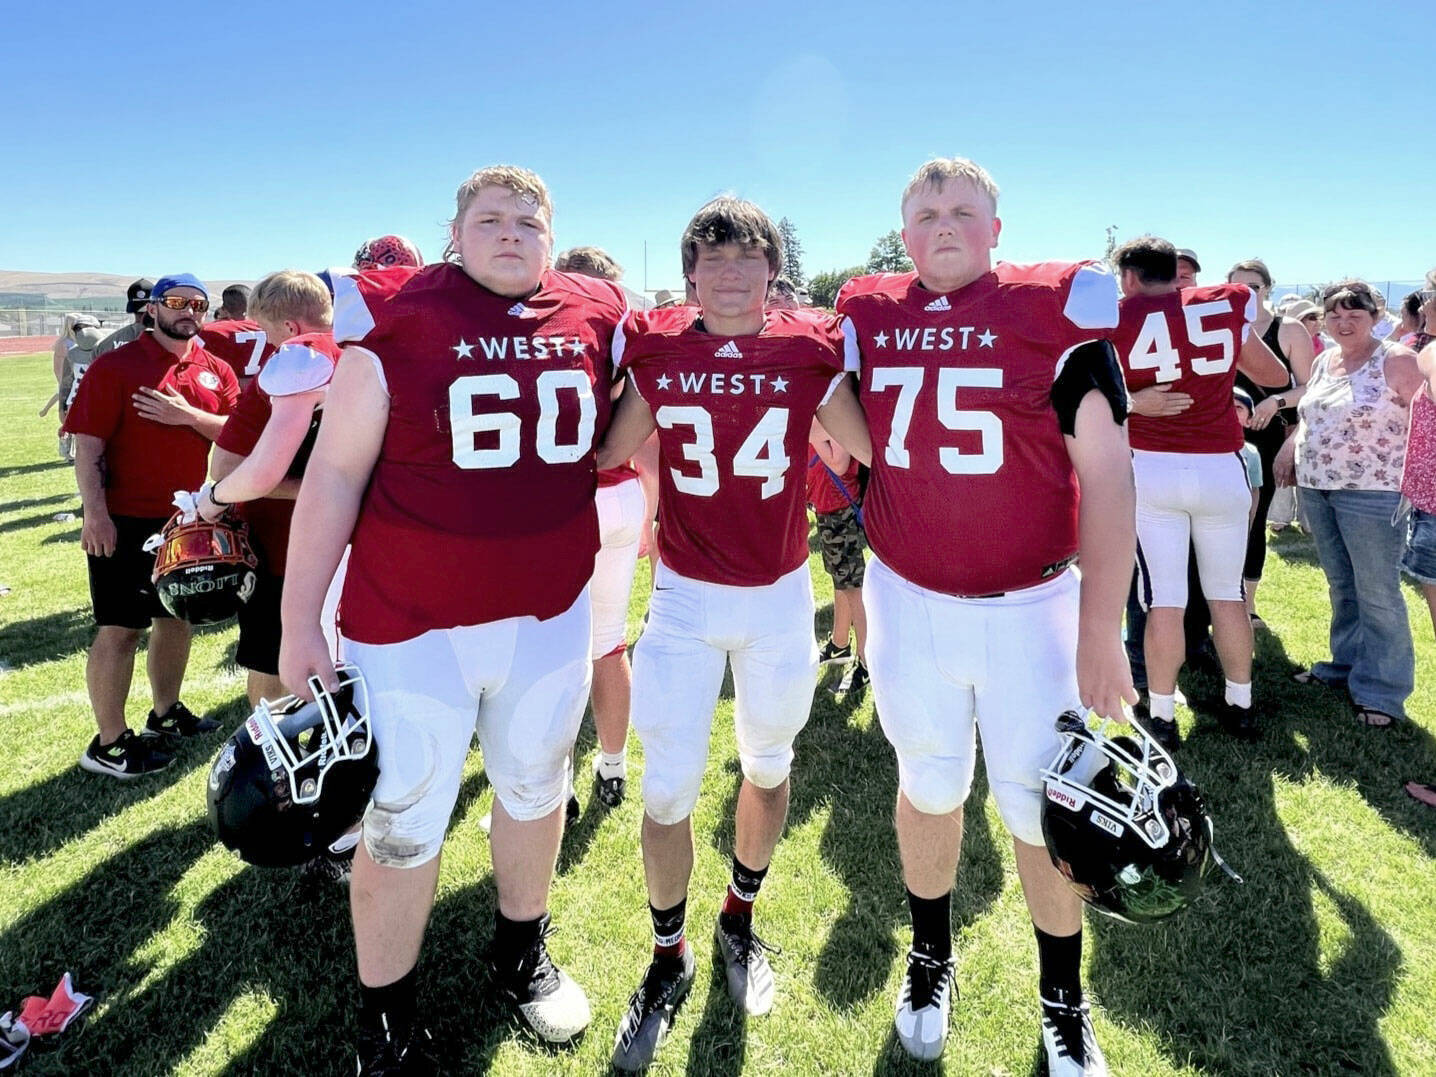 East Jefferson football players, from left, Chris Fair, Logan Massie and Marshall Graves competed for the West All-Stars in a 36-12 loss to the East in the Earl Barden All-Star Classic, the all-state football game for Class 1B through 2A schools, last Saturday in Yakima.